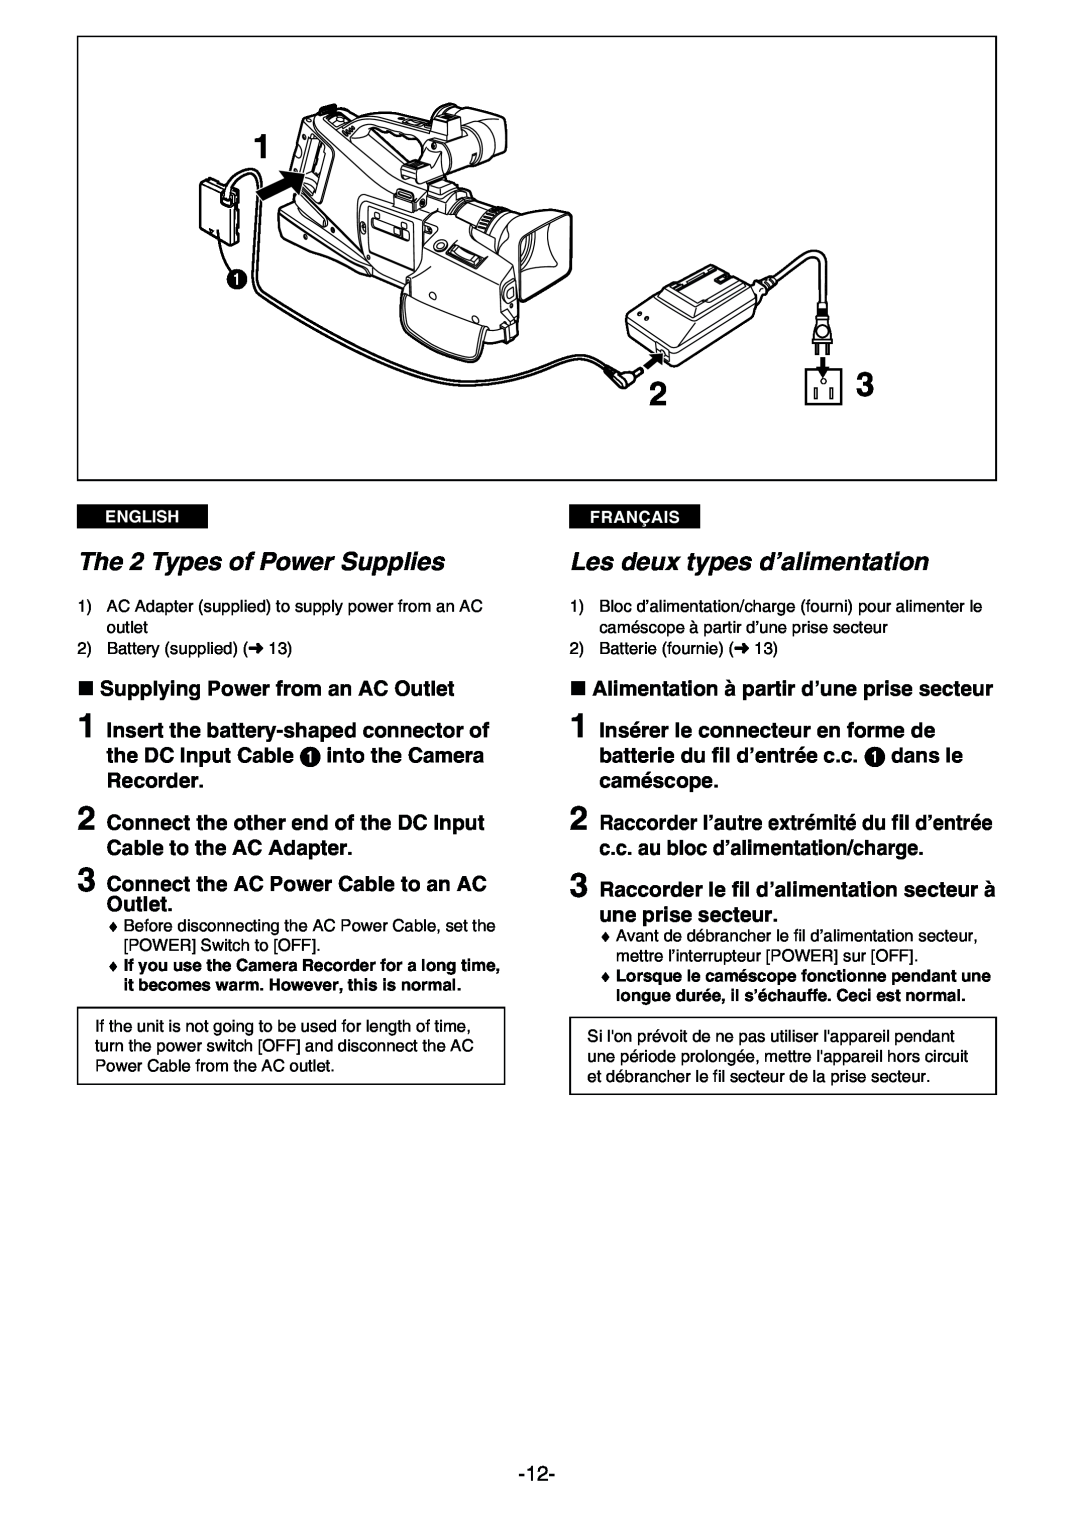 Panasonic AG- DVC 15P The 2 Types of Power Supplies, Les deux types d’alimentation, » Supplying Power from an AC Outlet 